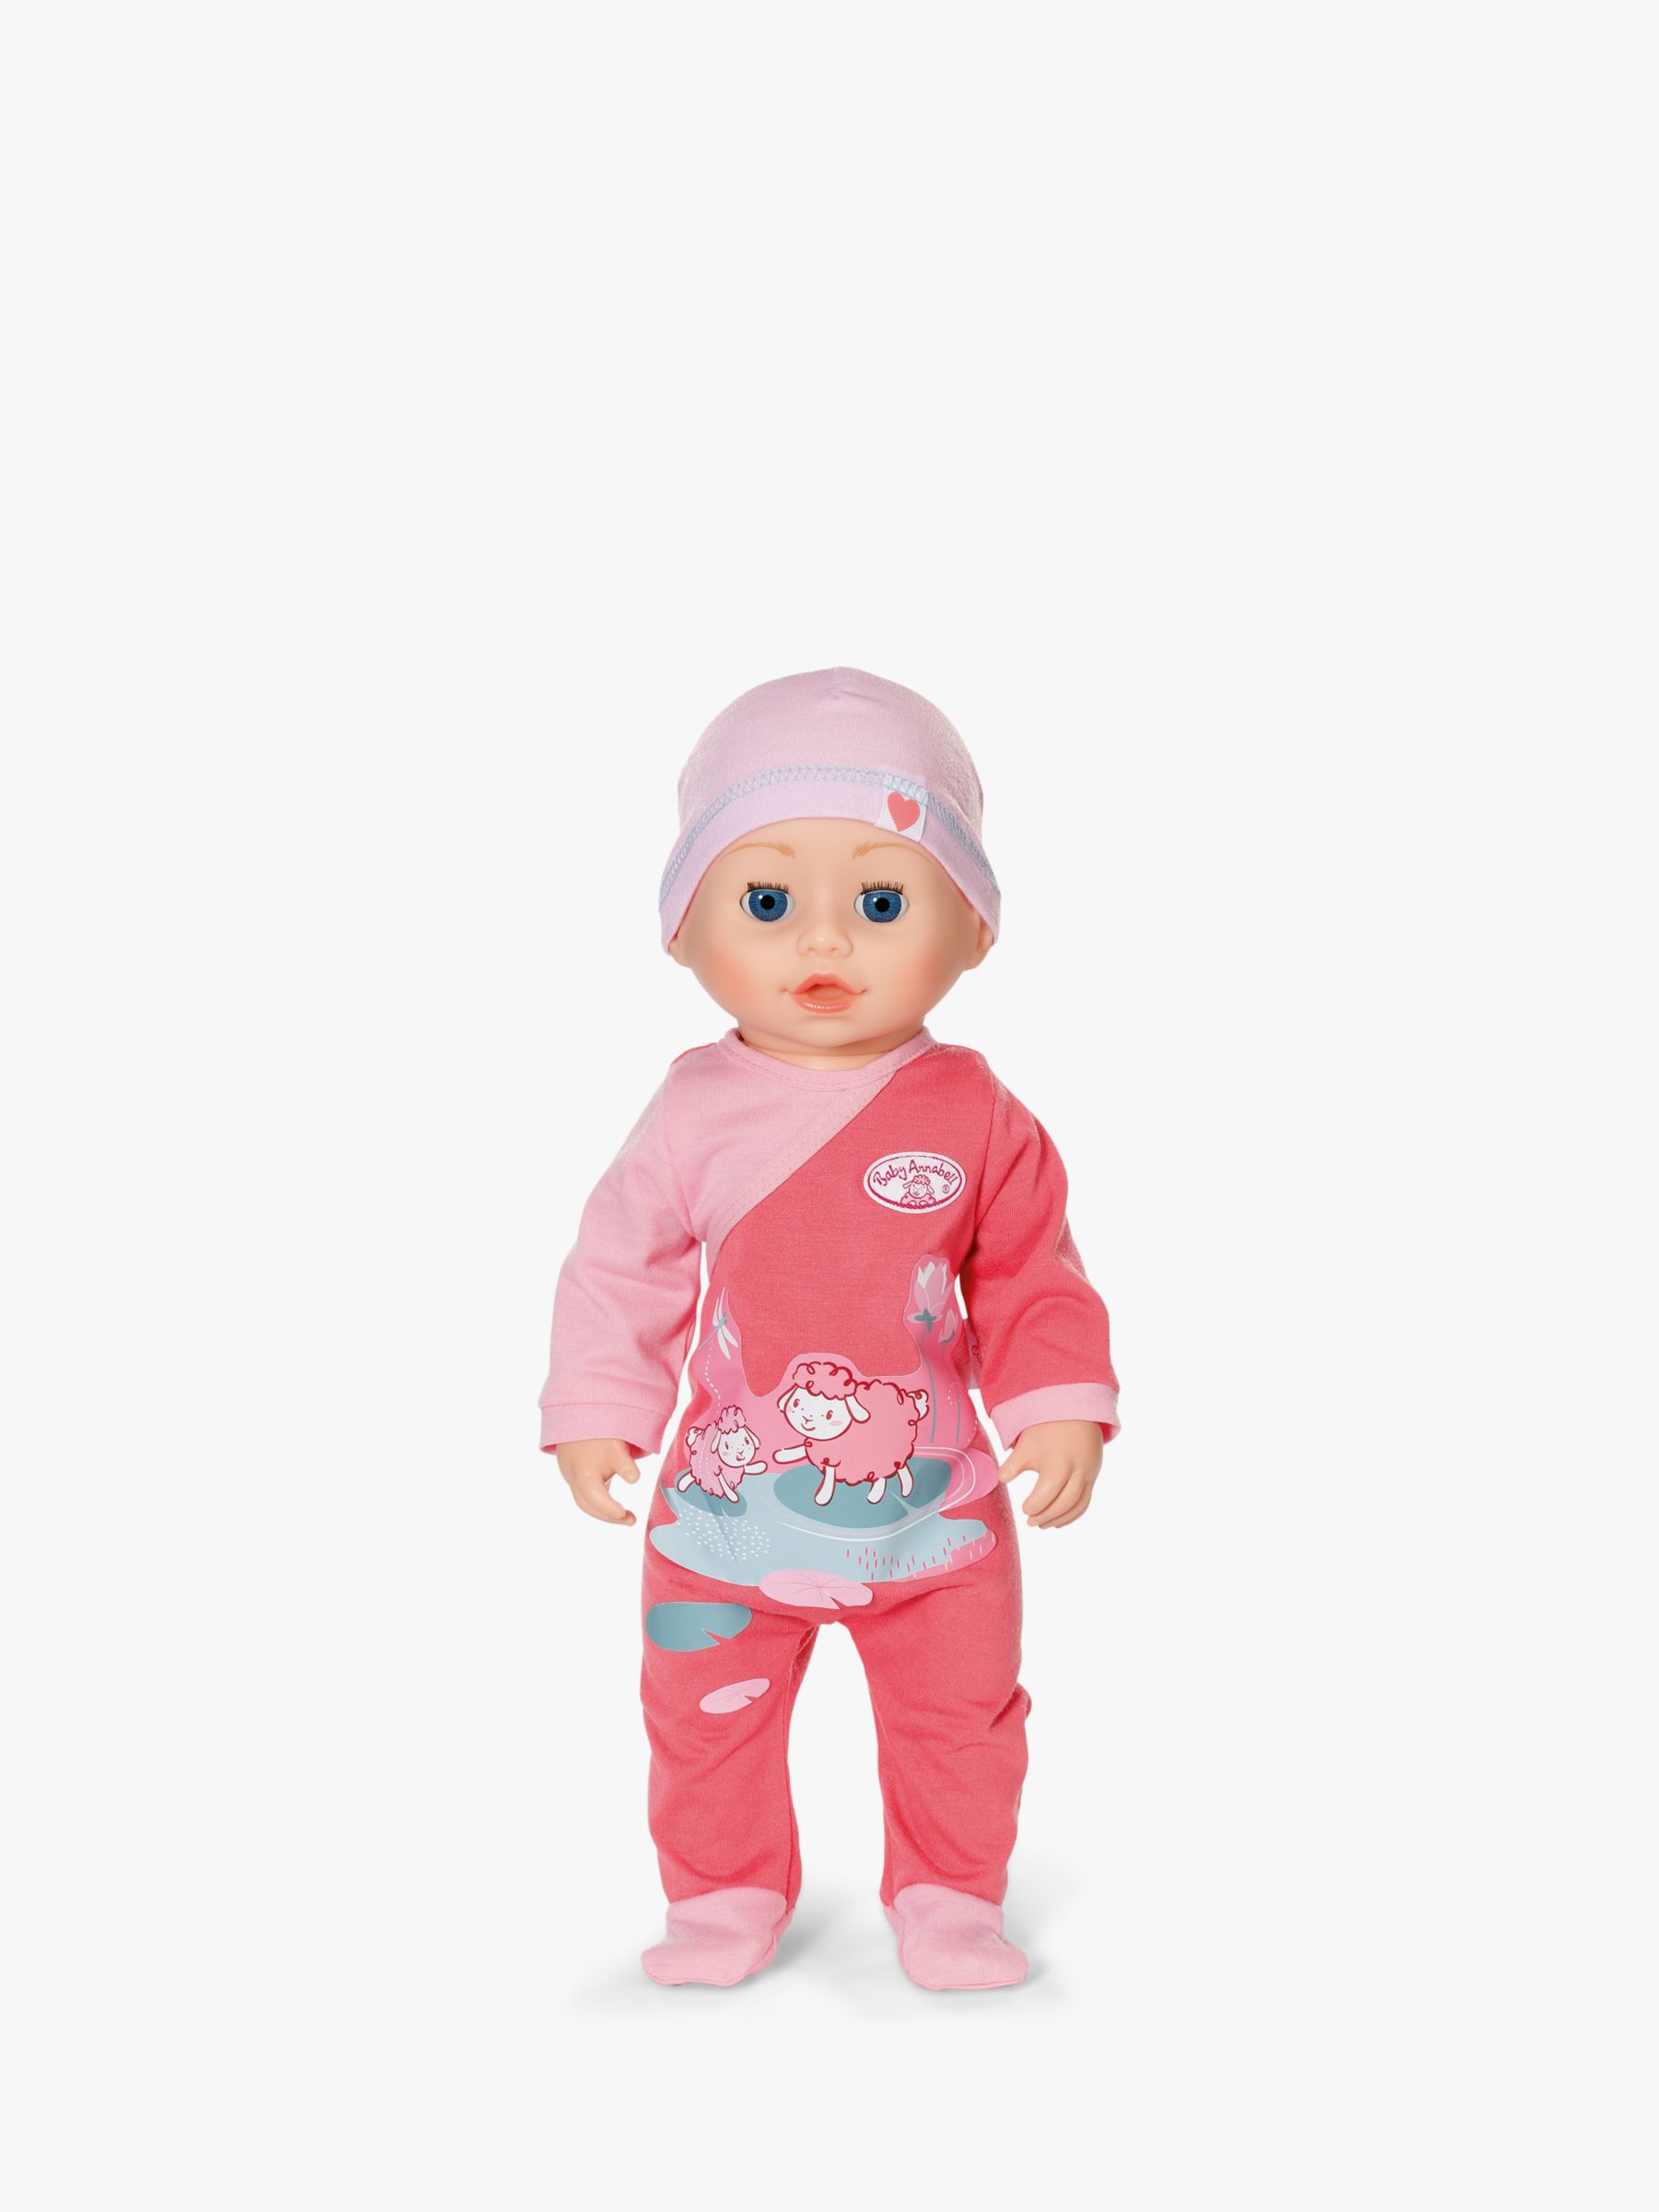  Emily Rose 18 Inch Doll Sports Yoga Exercise Clothes